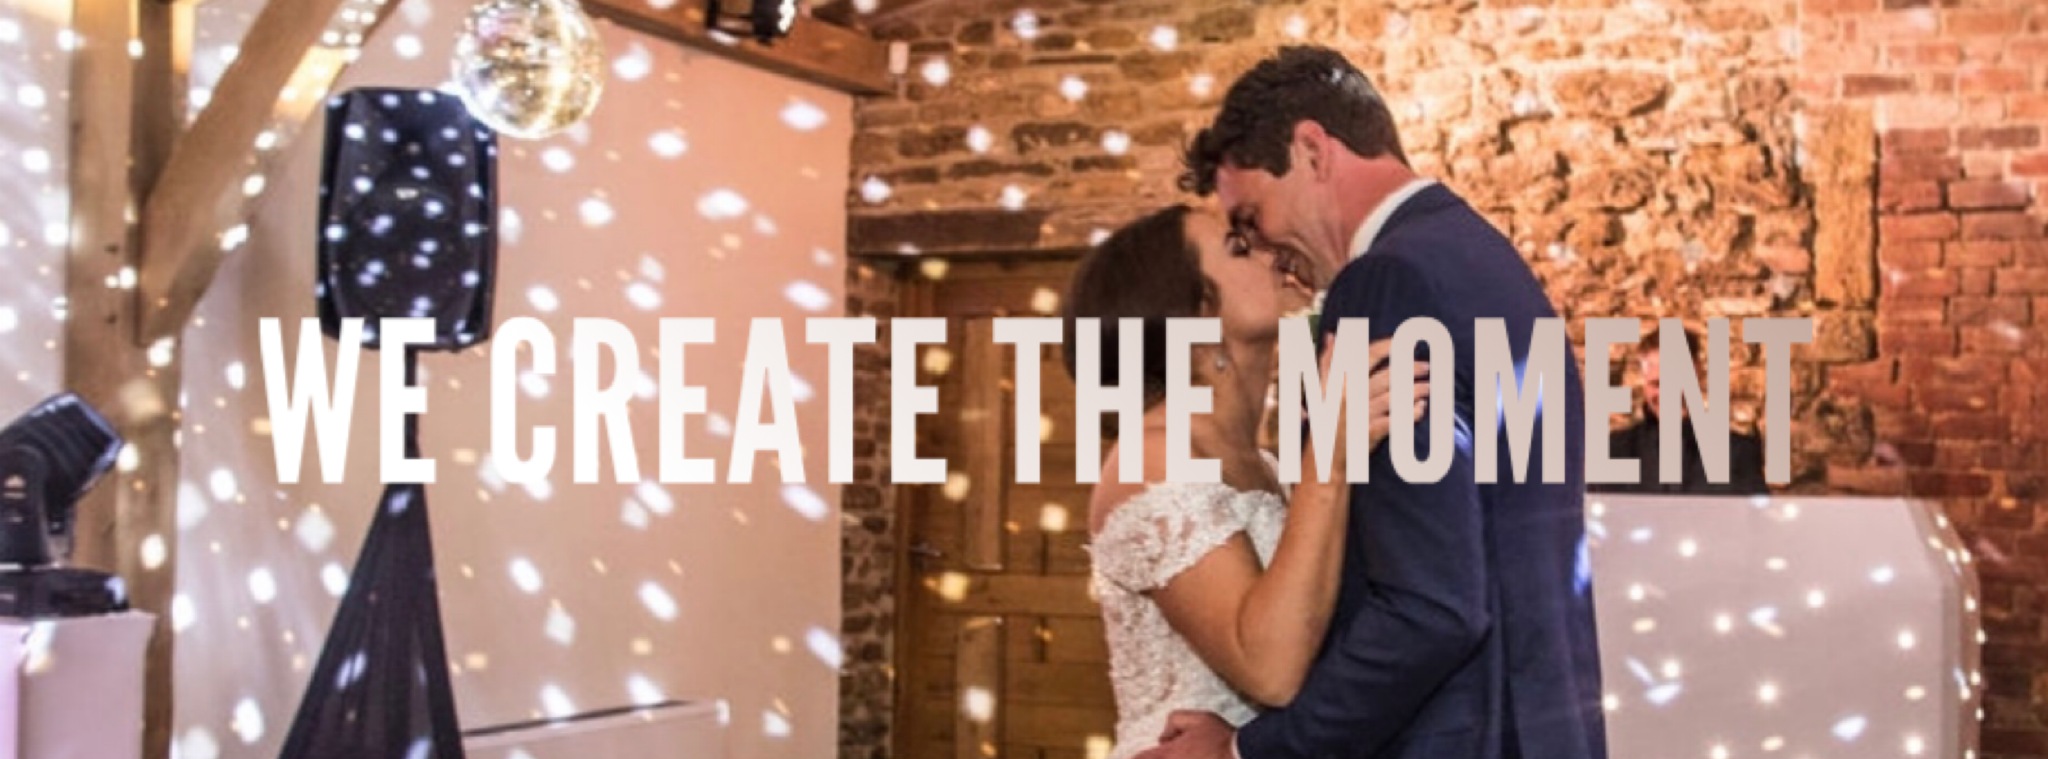 Dodford Manor Wedding DJs and Entertainment